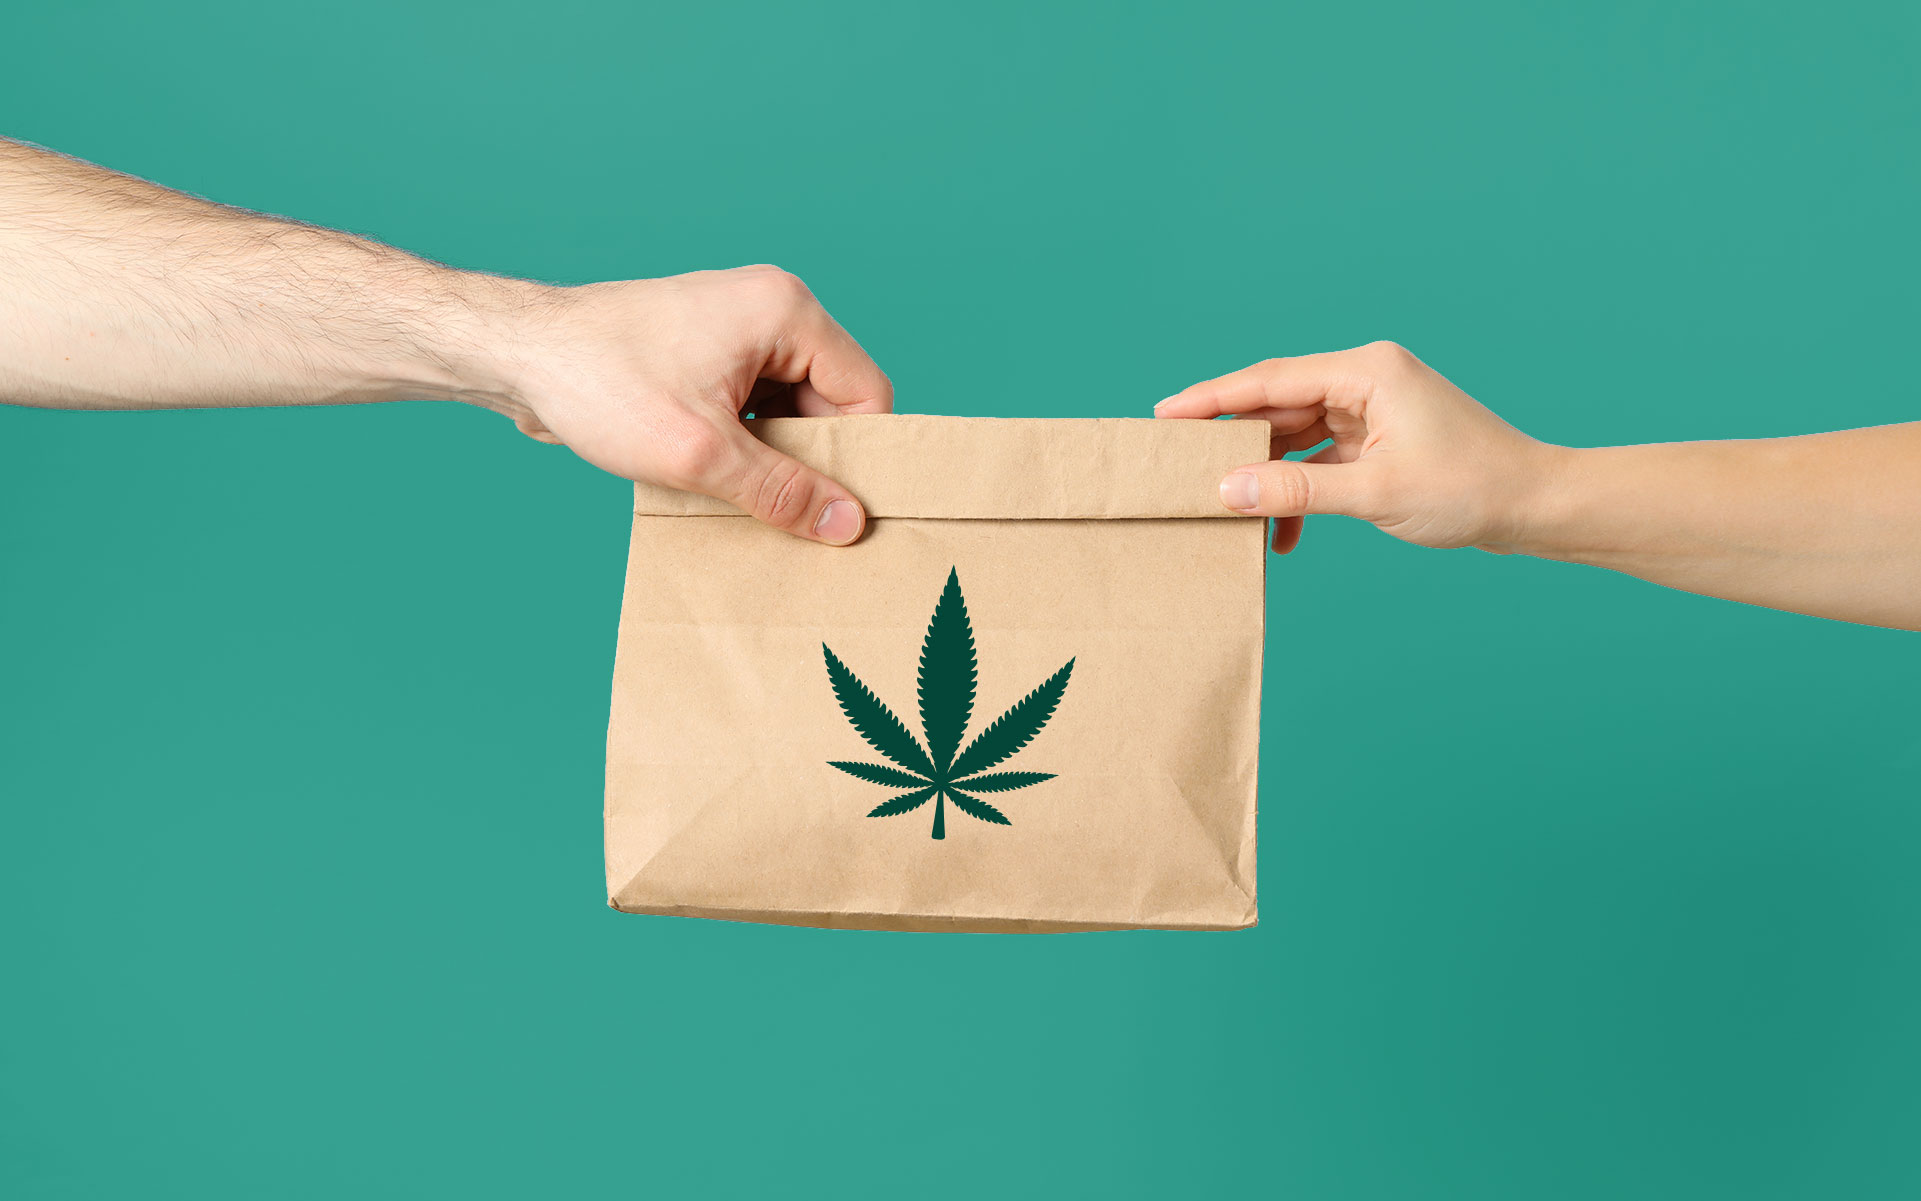 cannabis delivery service